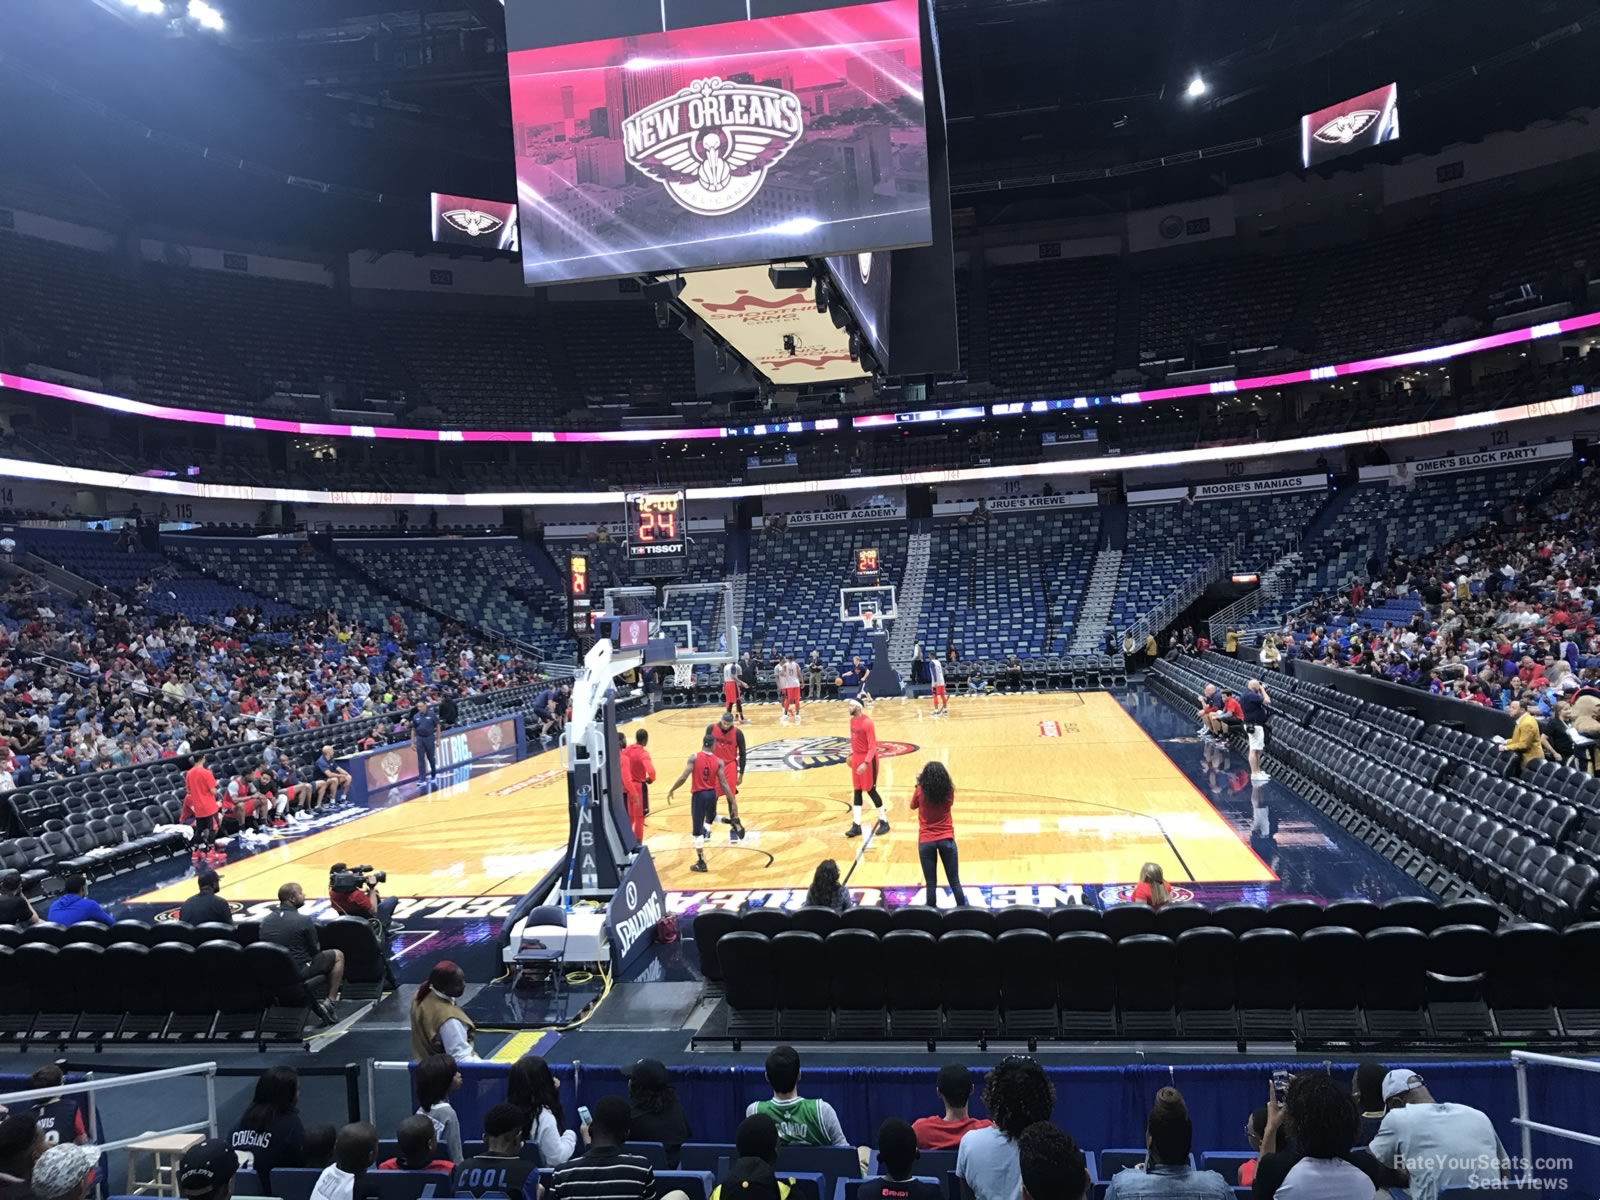 Smoothie King Center Seating Plan, New Orleans Pelicans Seating Chart